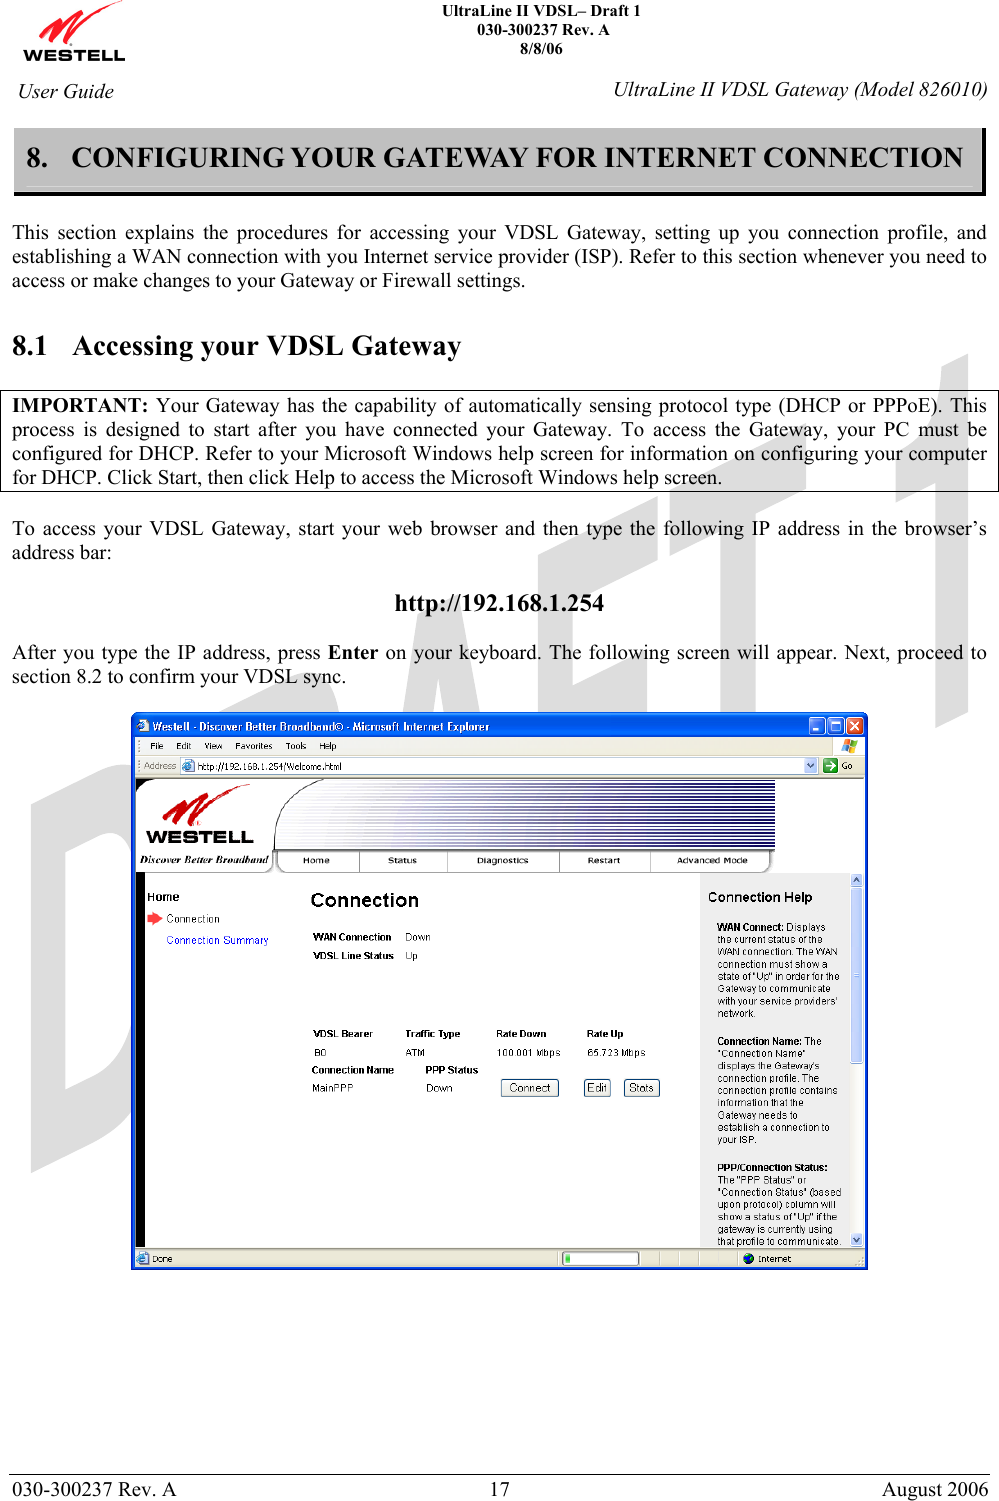    UltraLine II VDSL– Draft 1  030-300237 Rev. A 8/8/06   030-300237 Rev. A  17  August 2006  User Guide  UltraLine II VDSL Gateway (Model 826010) 8. CONFIGURING YOUR GATEWAY FOR INTERNET CONNECTION  This section explains the procedures for accessing your VDSL Gateway, setting up you connection profile, and establishing a WAN connection with you Internet service provider (ISP). Refer to this section whenever you need to access or make changes to your Gateway or Firewall settings.  8.1 Accessing your VDSL Gateway  IMPORTANT: Your Gateway has the capability of automatically sensing protocol type (DHCP or PPPoE). This process is designed to start after you have connected your Gateway. To access the Gateway, your PC must be configured for DHCP. Refer to your Microsoft Windows help screen for information on configuring your computer for DHCP. Click Start, then click Help to access the Microsoft Windows help screen.  To access your VDSL Gateway, start your web browser and then type the following IP address in the browser’s address bar:  http://192.168.1.254  After you type the IP address, press Enter on your keyboard. The following screen will appear. Next, proceed to section 8.2 to confirm your VDSL sync.           